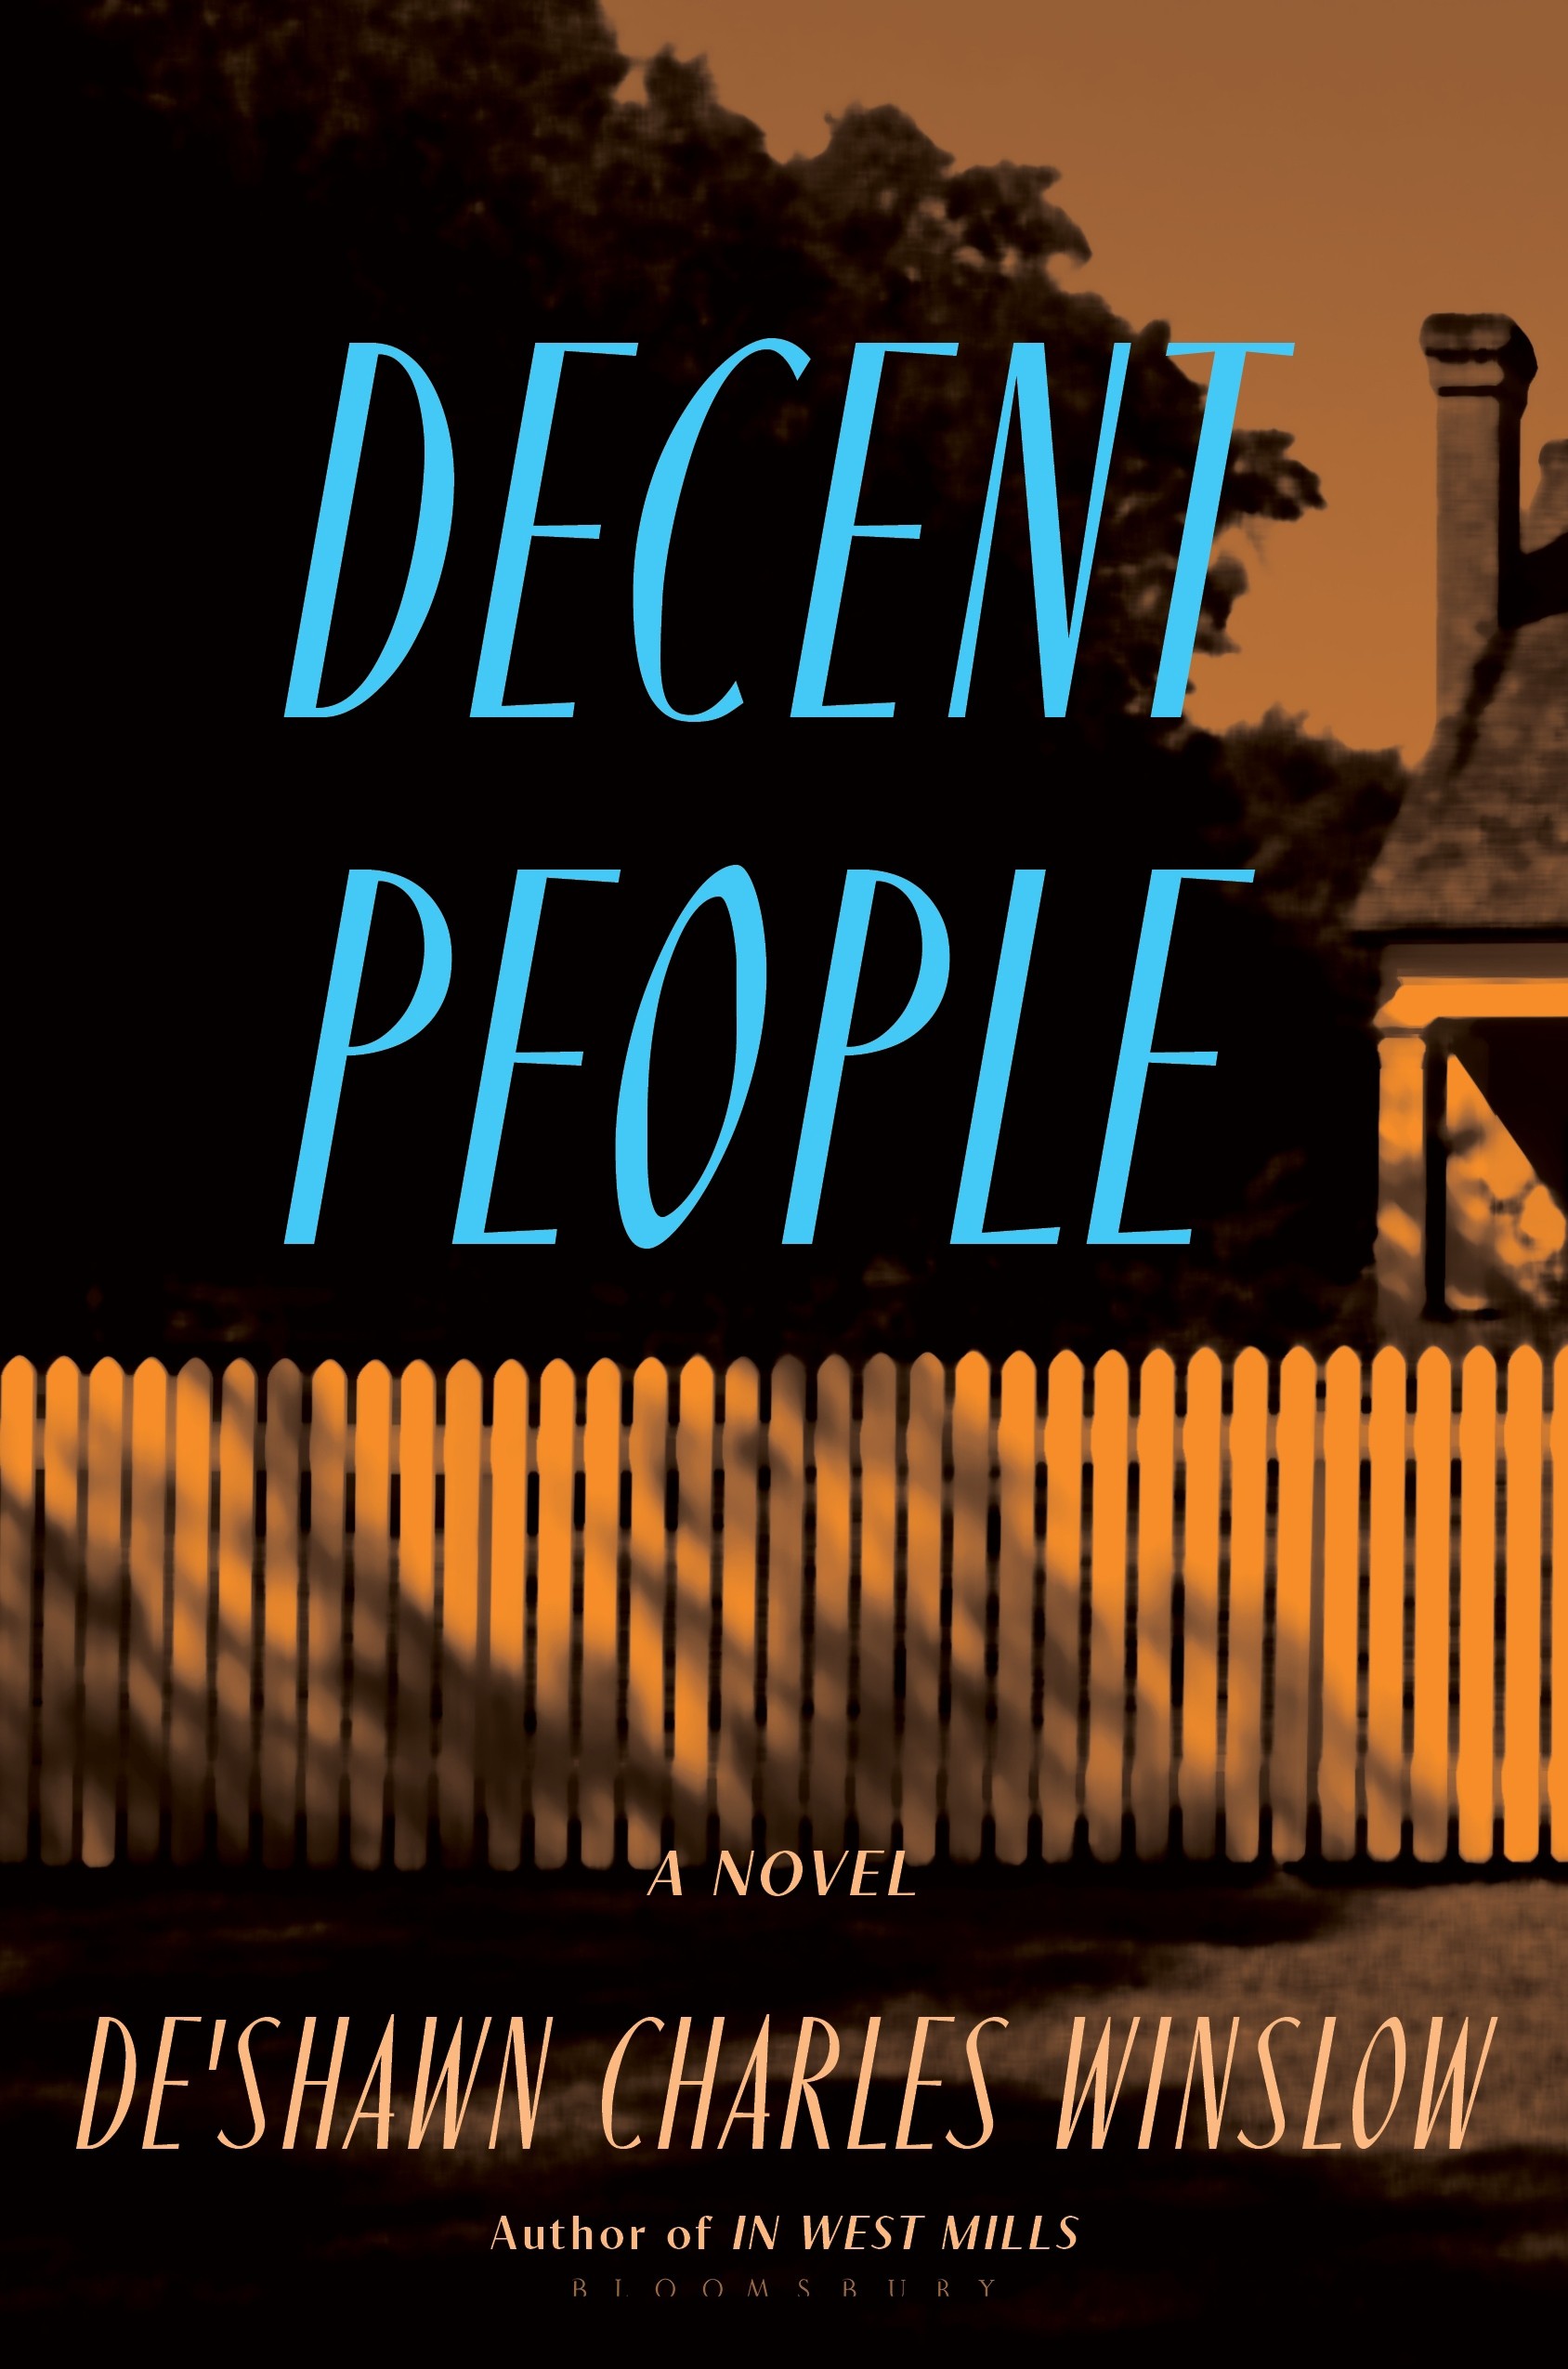 NDG Book Review: ‘Decent People’